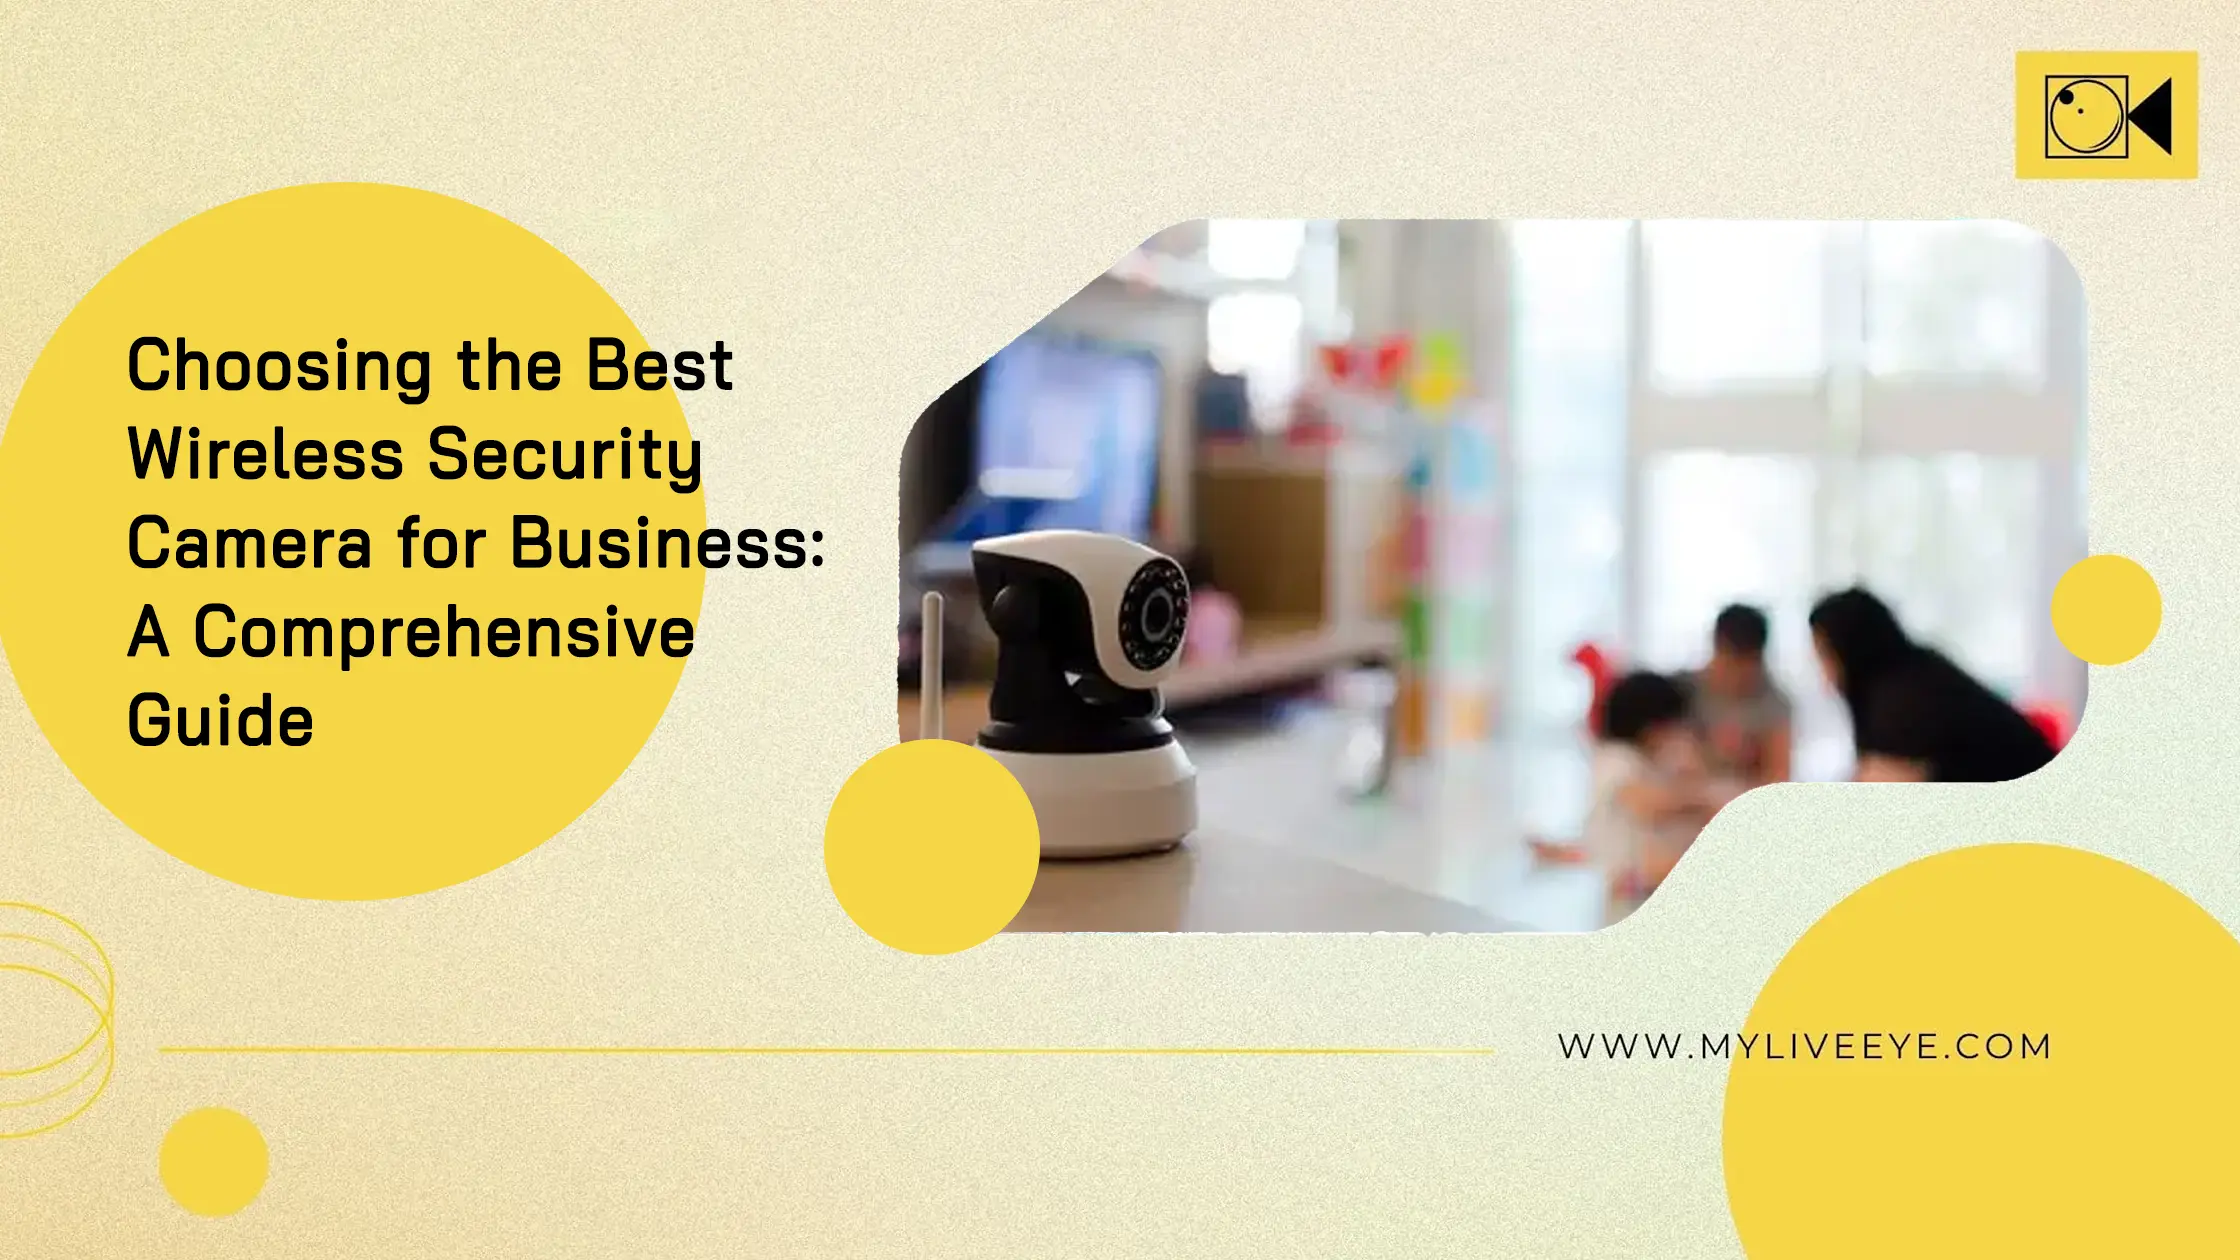 Choosing the Best Wireless Security Camera for Business